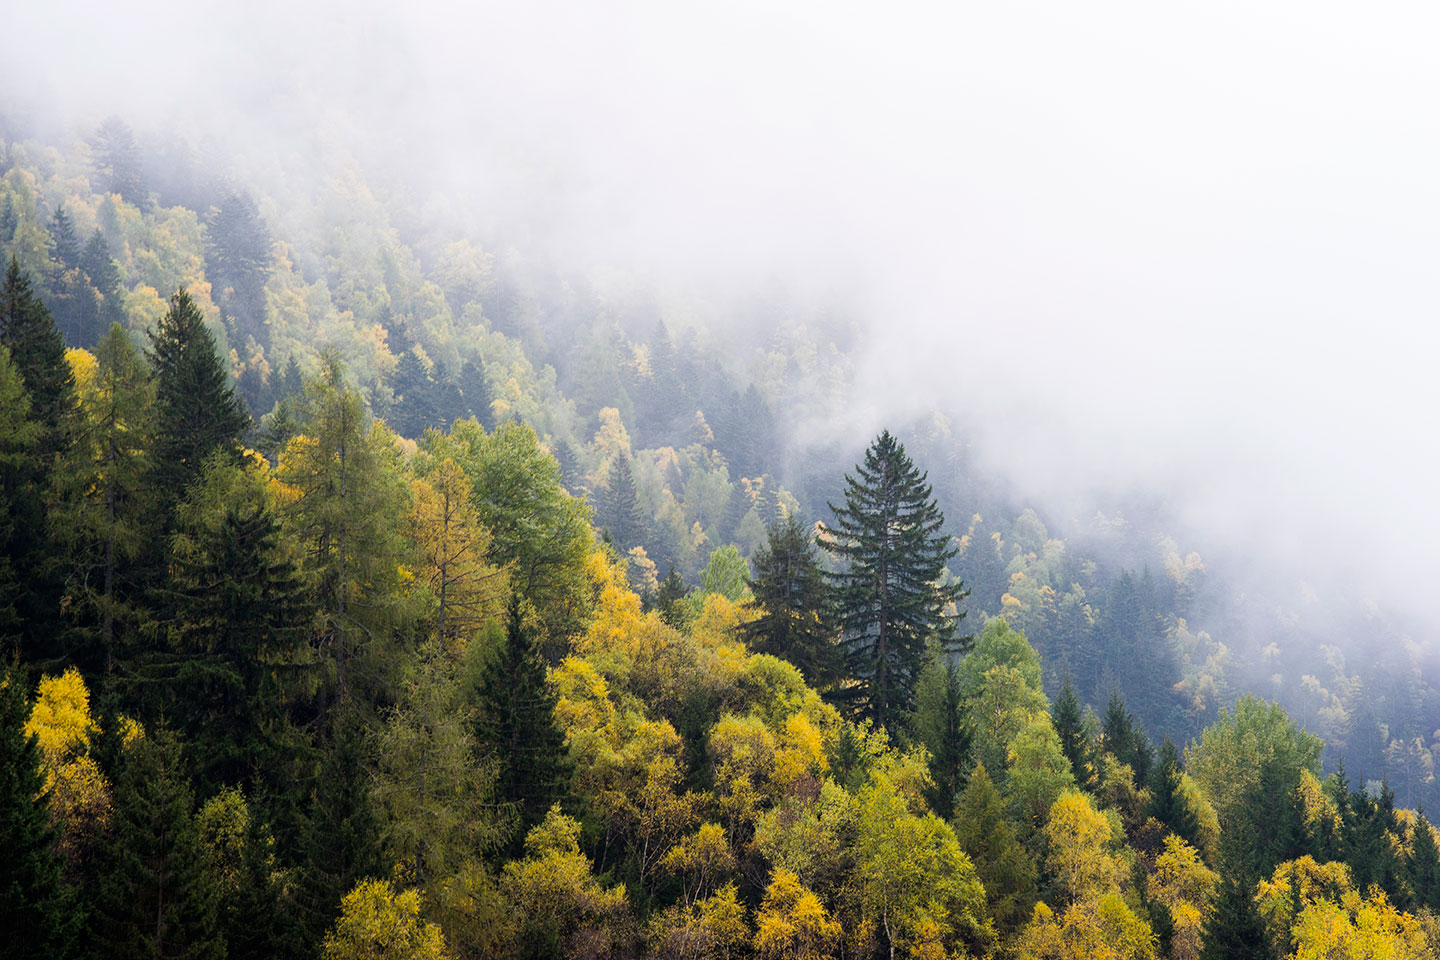 A foggy aerial view of a forest